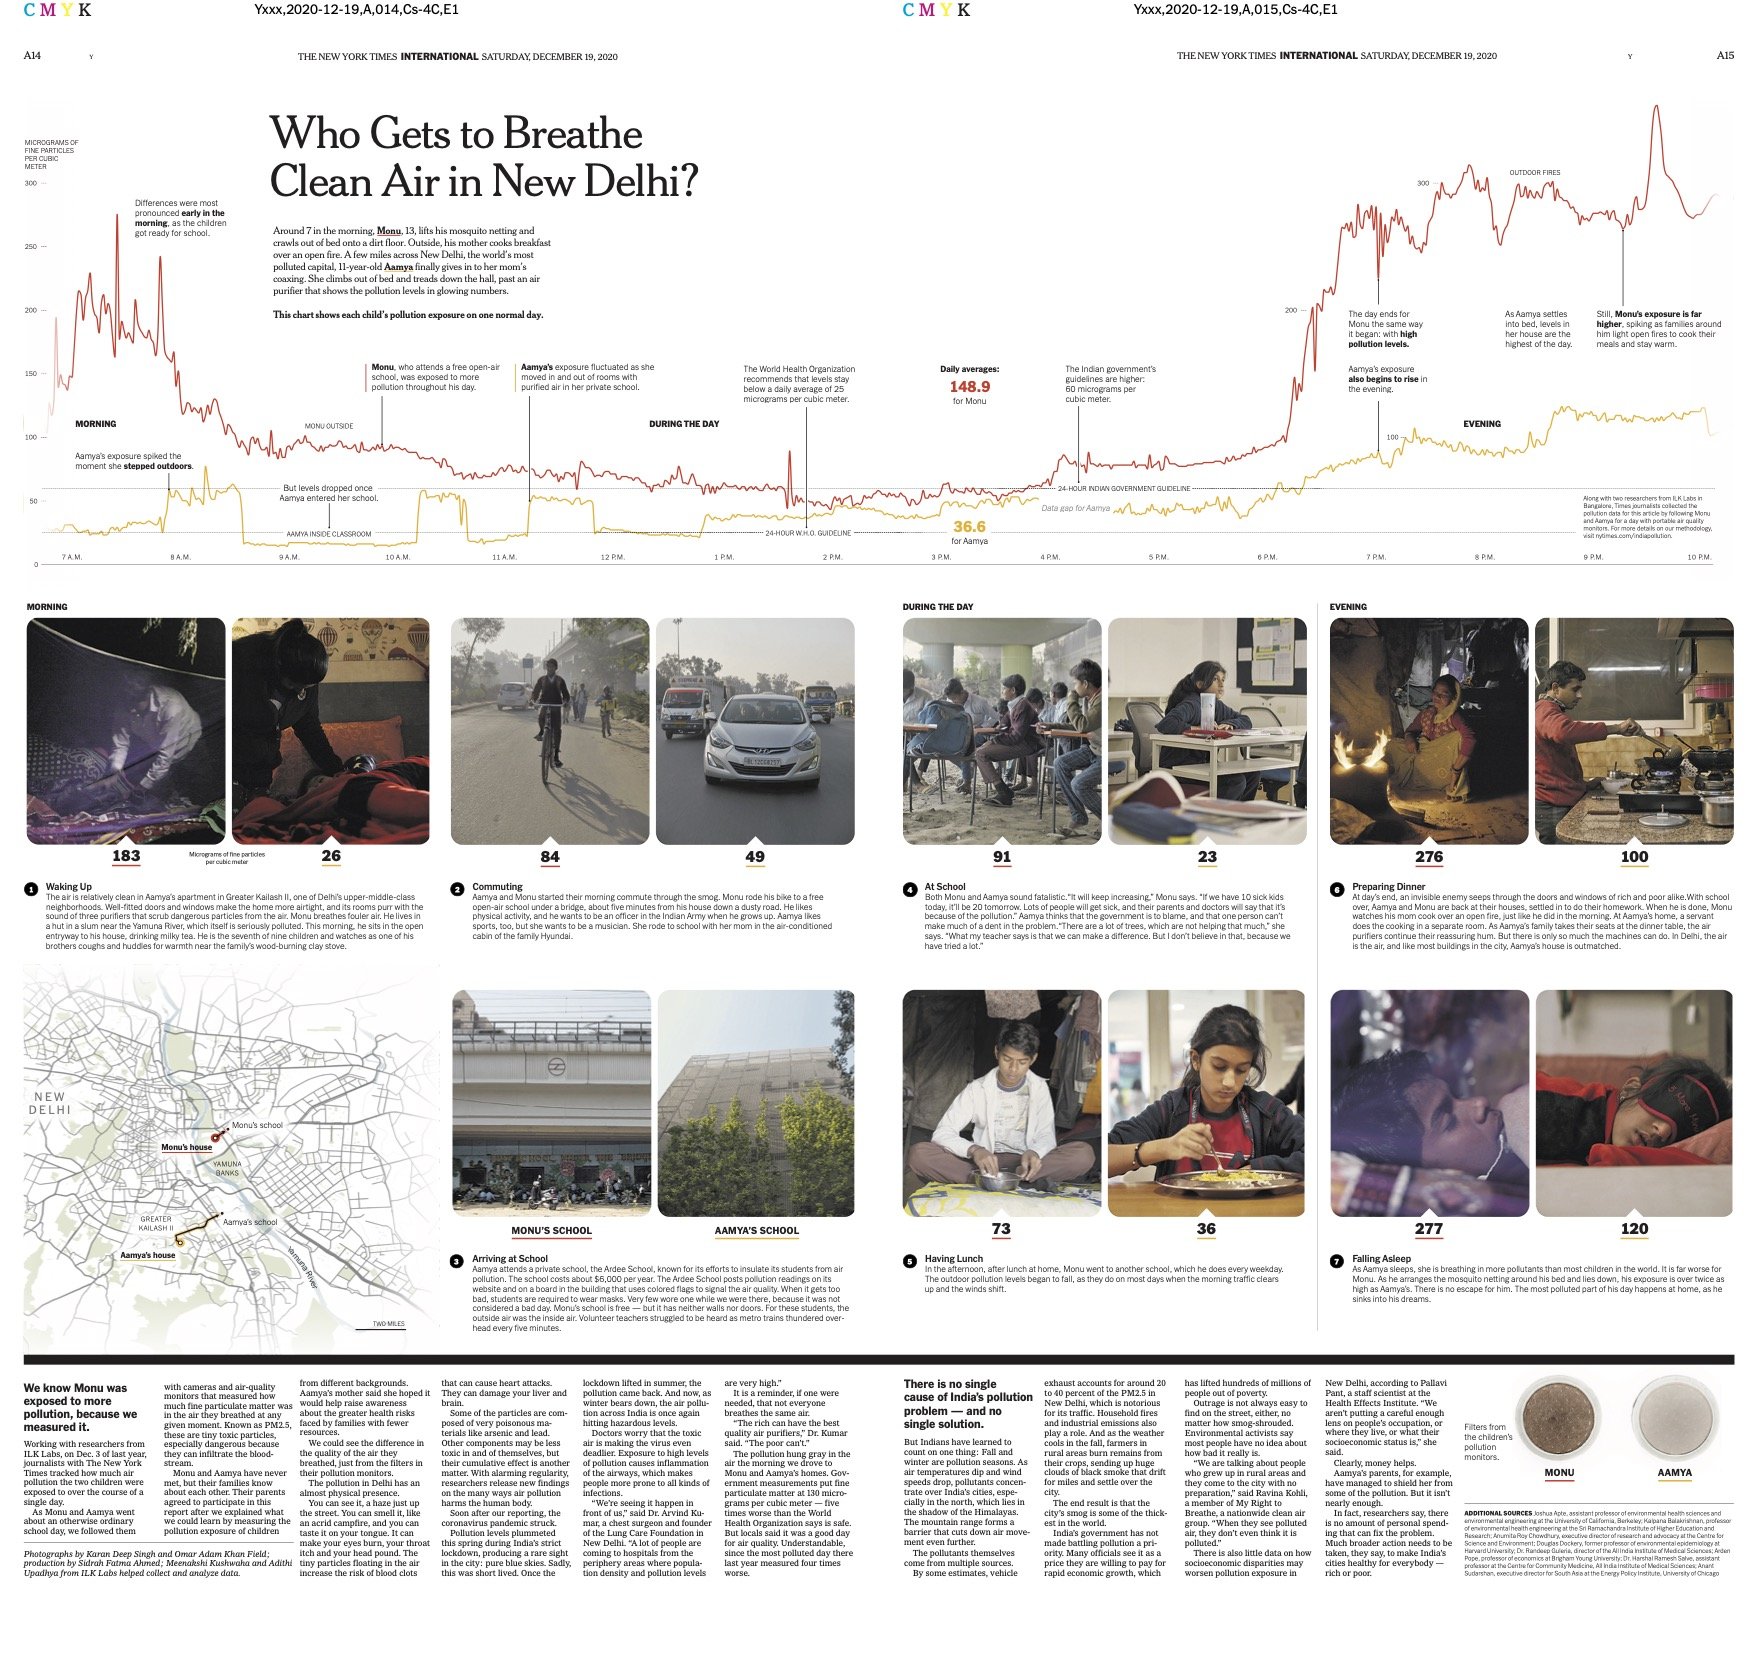 NYTimes 12-19-2020, National 1 - Foreign-spread.jpg